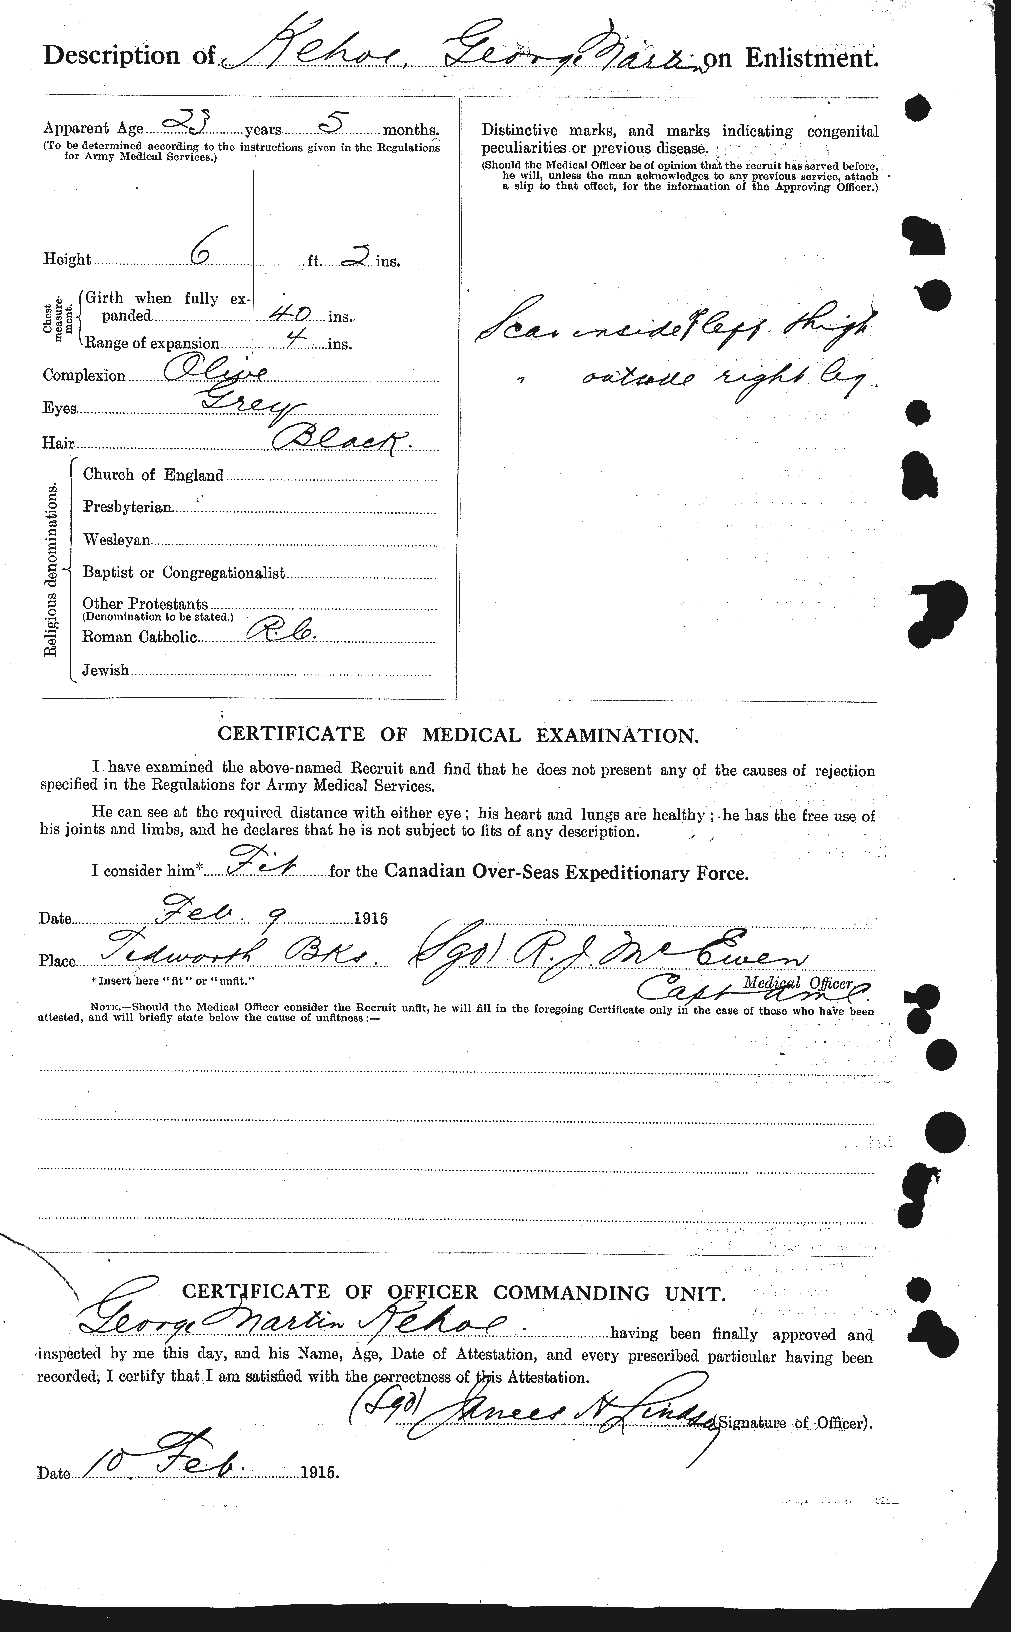 Personnel Records of the First World War - CEF 432206b